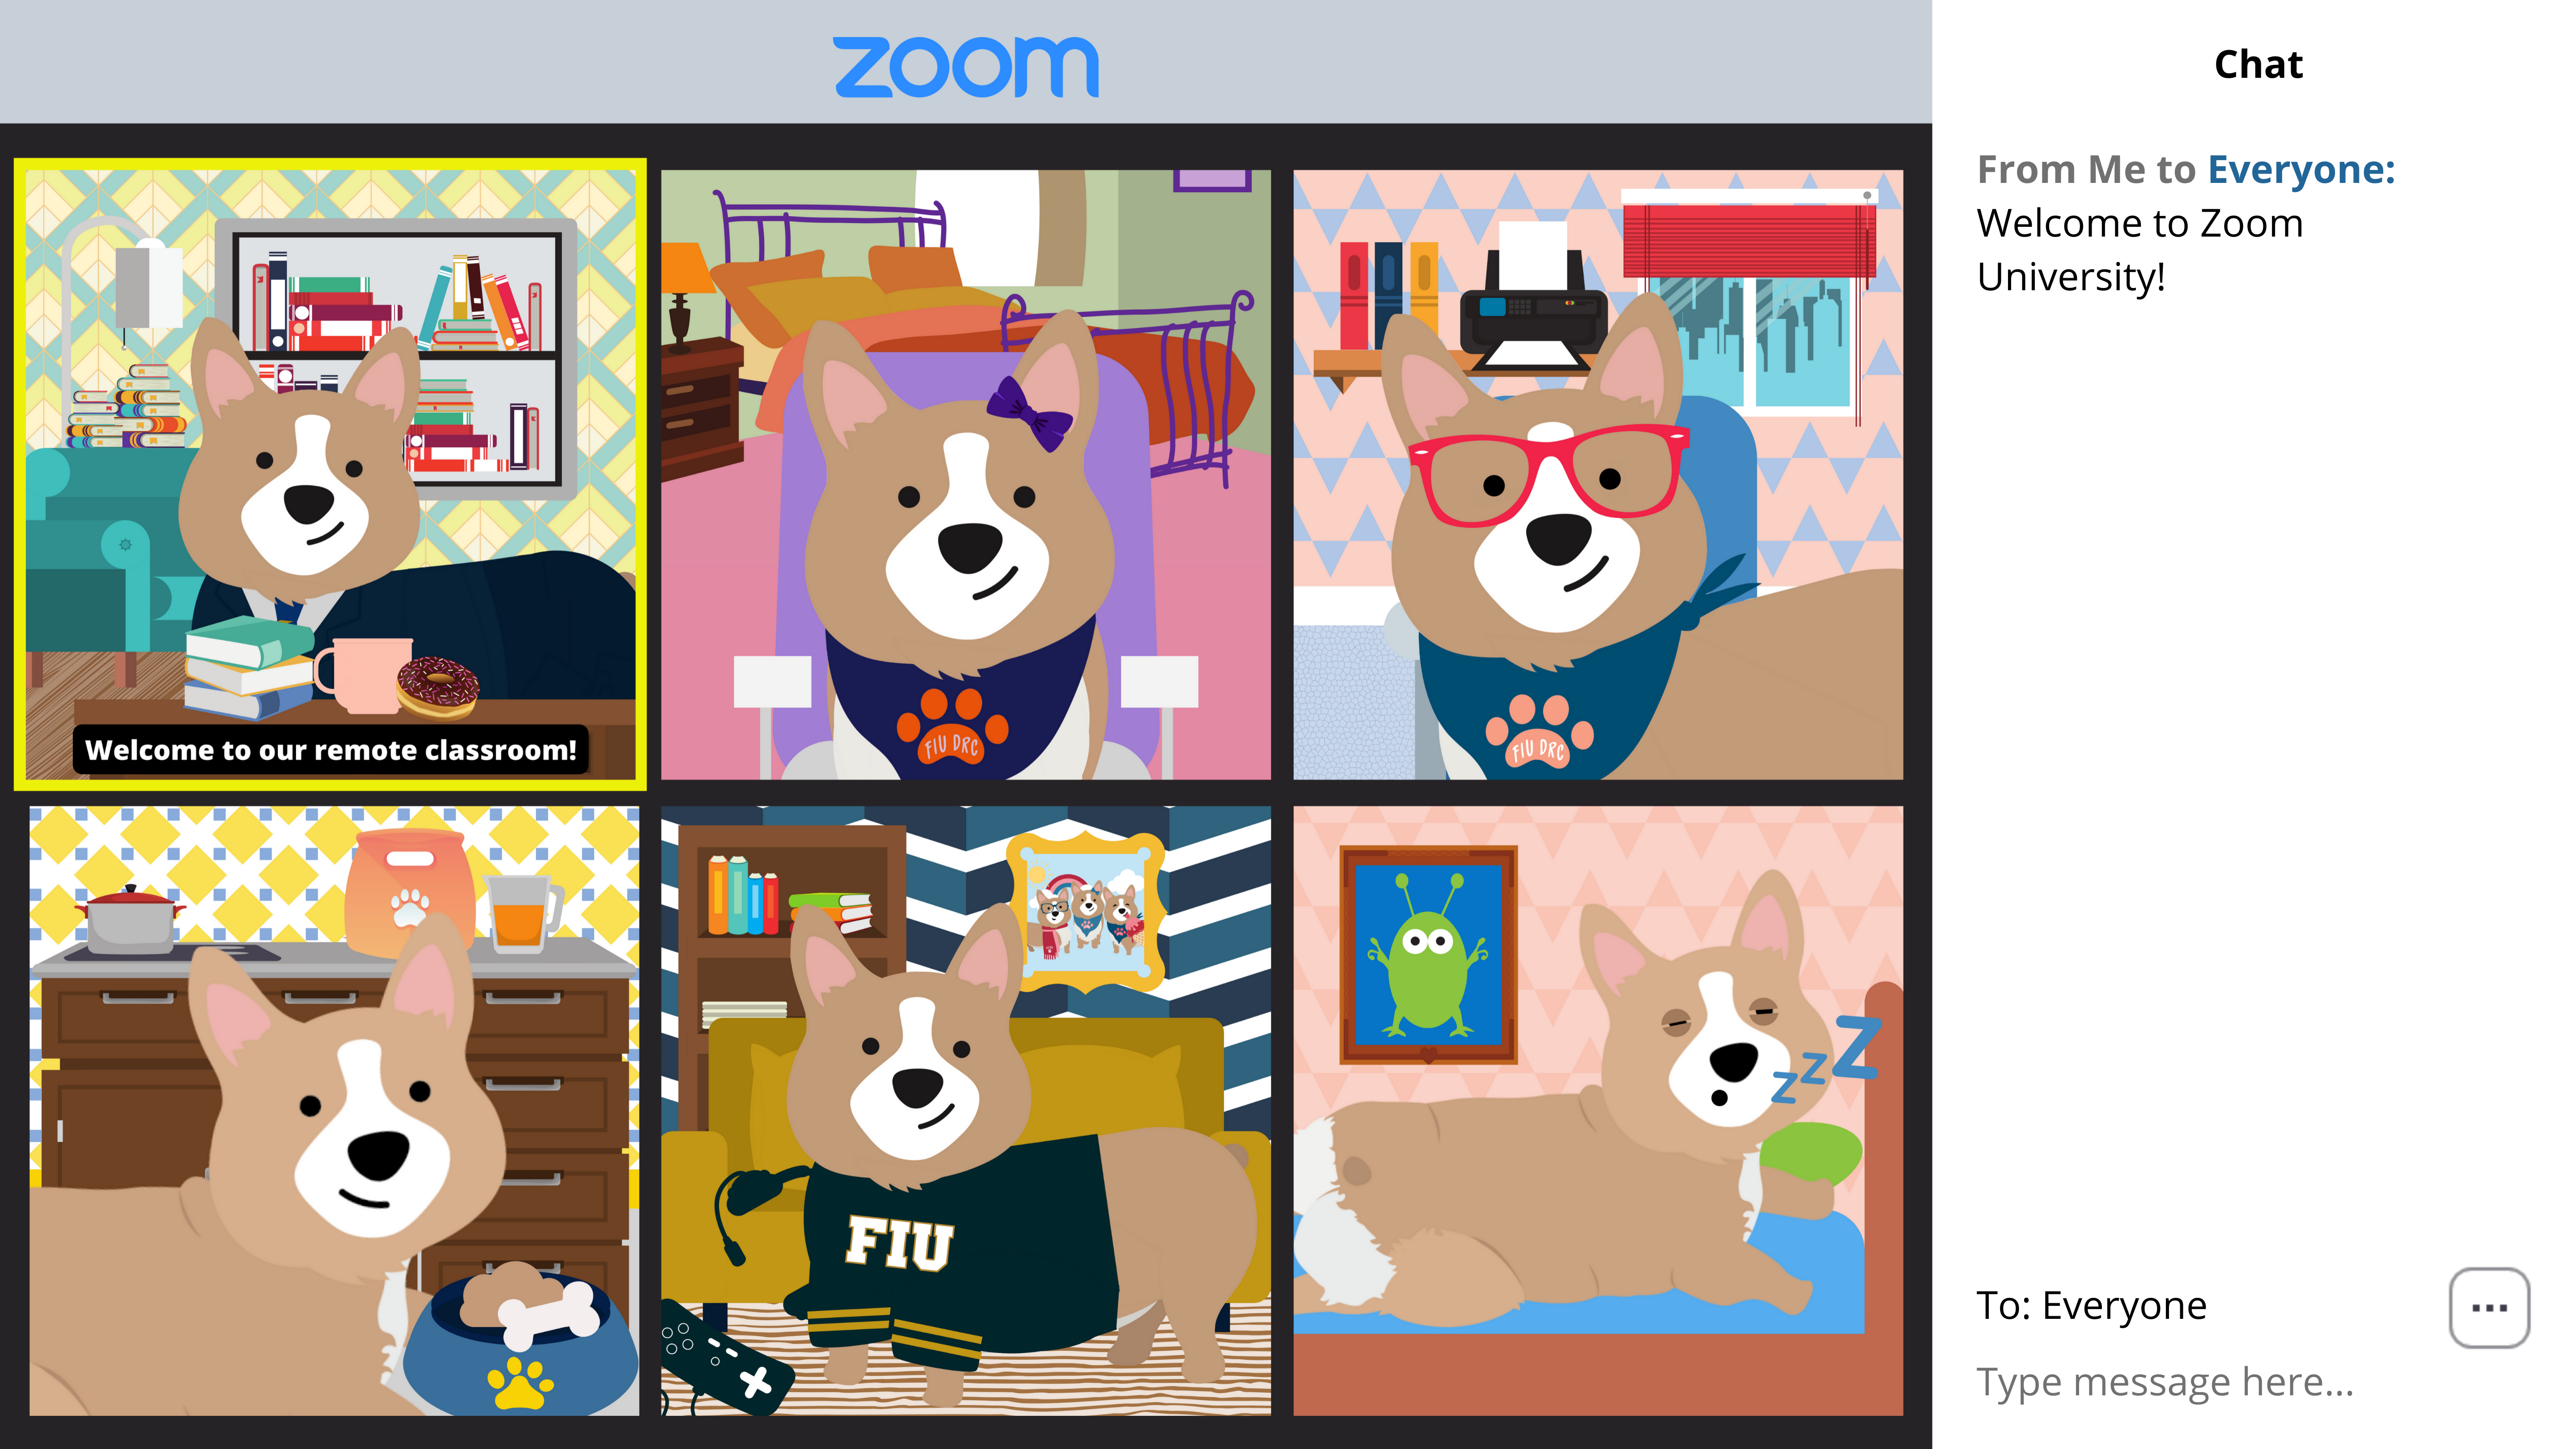 A group of corgis gather over Zoom. One corgi says "Welcome to our remote classroom." While four corgi students are alert and listening, one is snoozing.